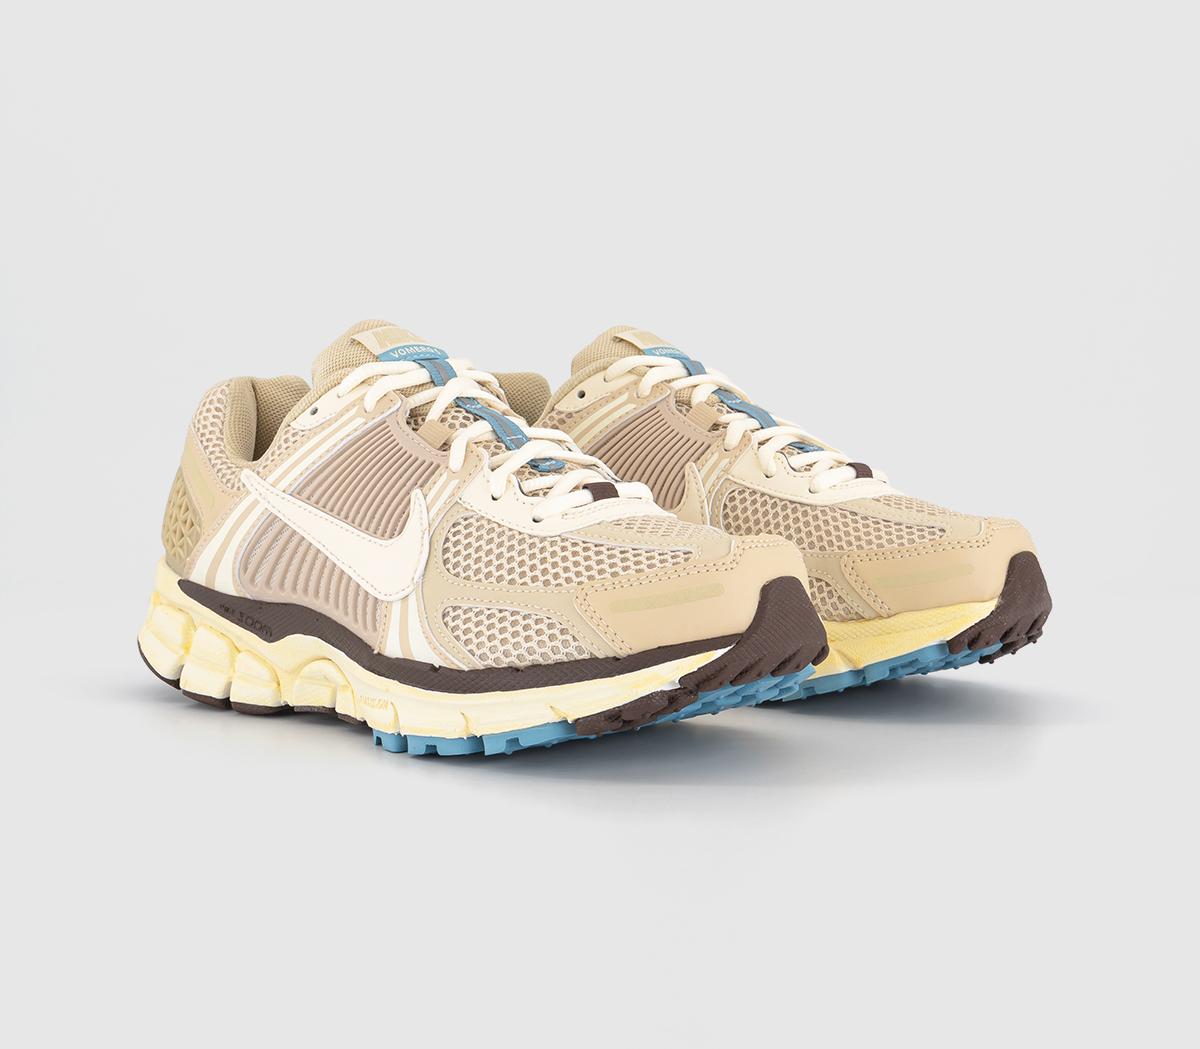 Nike Womens Zoom Vomero 5 Trainers Oatmeal Pale Ivory Sail Light Chocolate Worn Blue Natural, 7